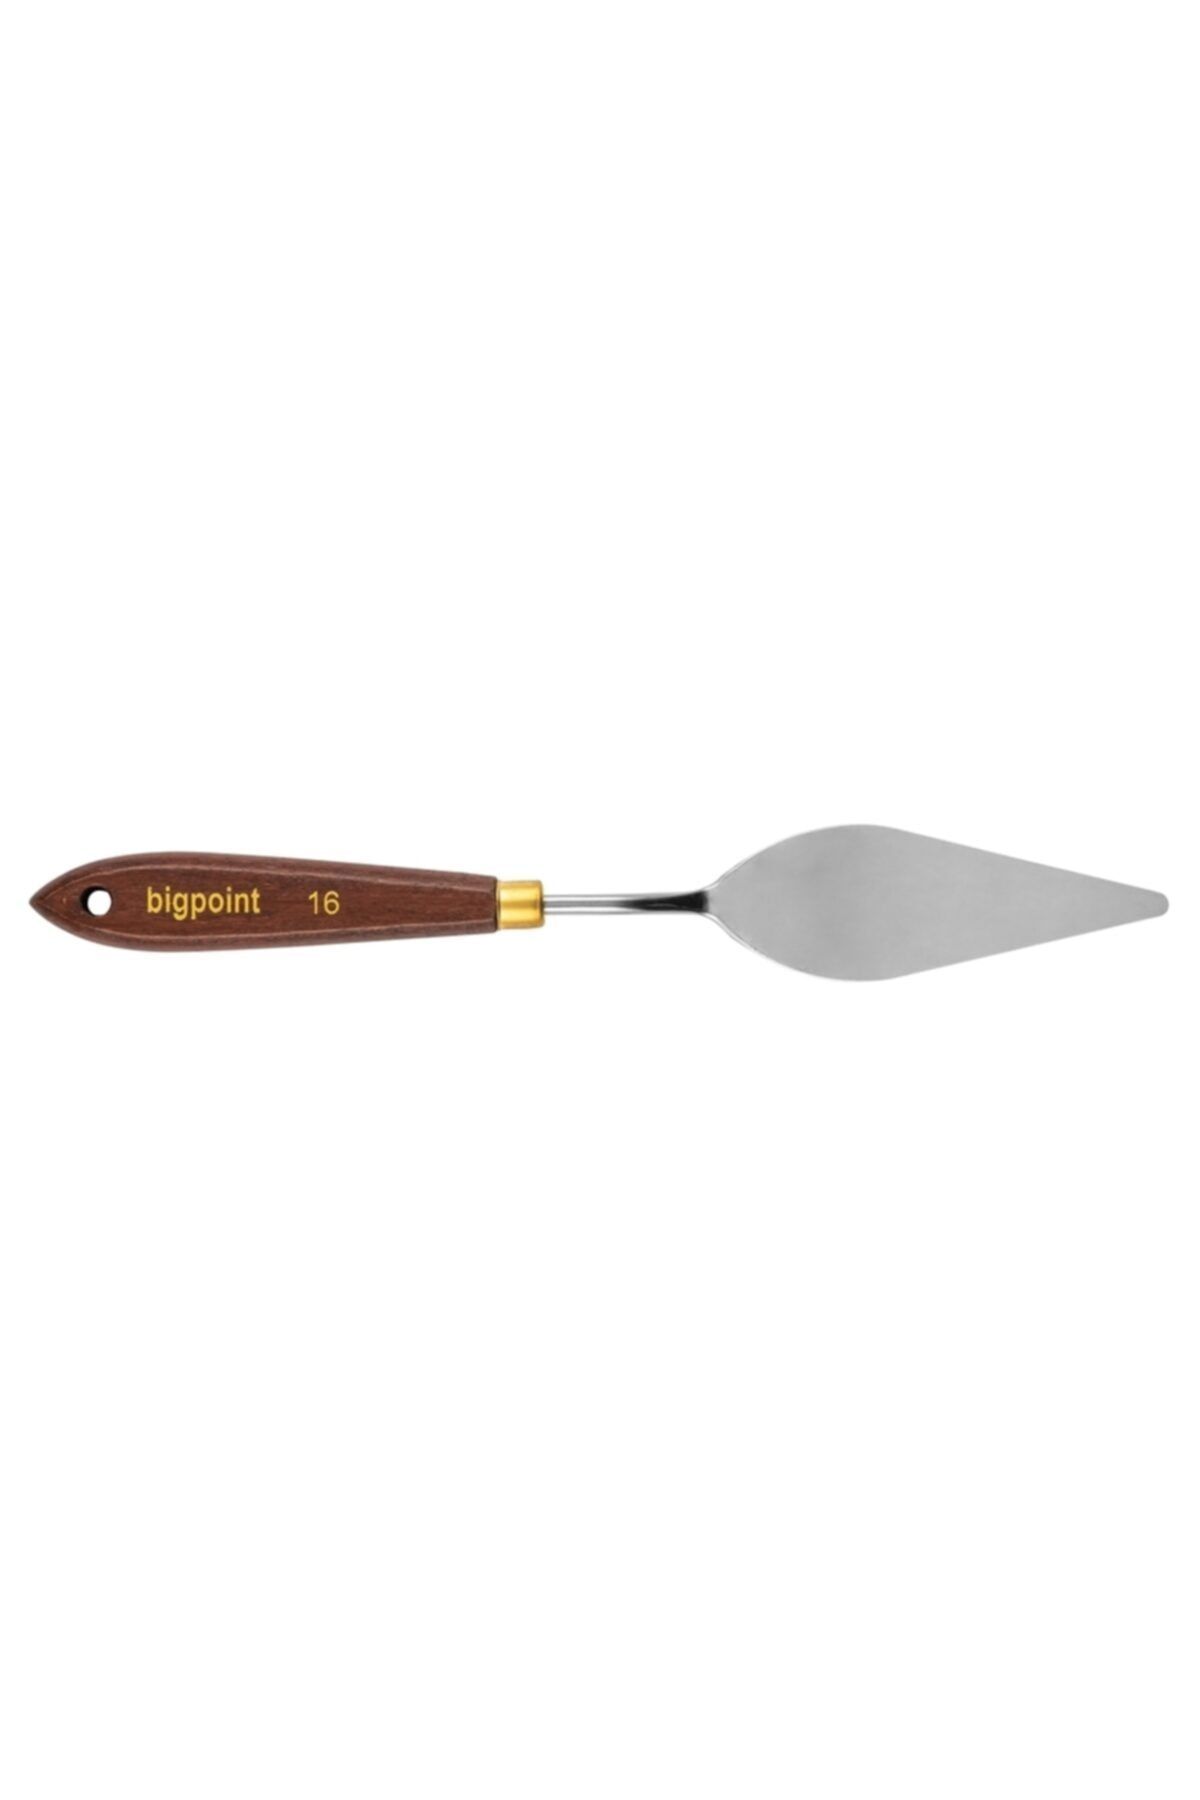 Bigpoint Metal Spatula No: 16 (painting Knife)